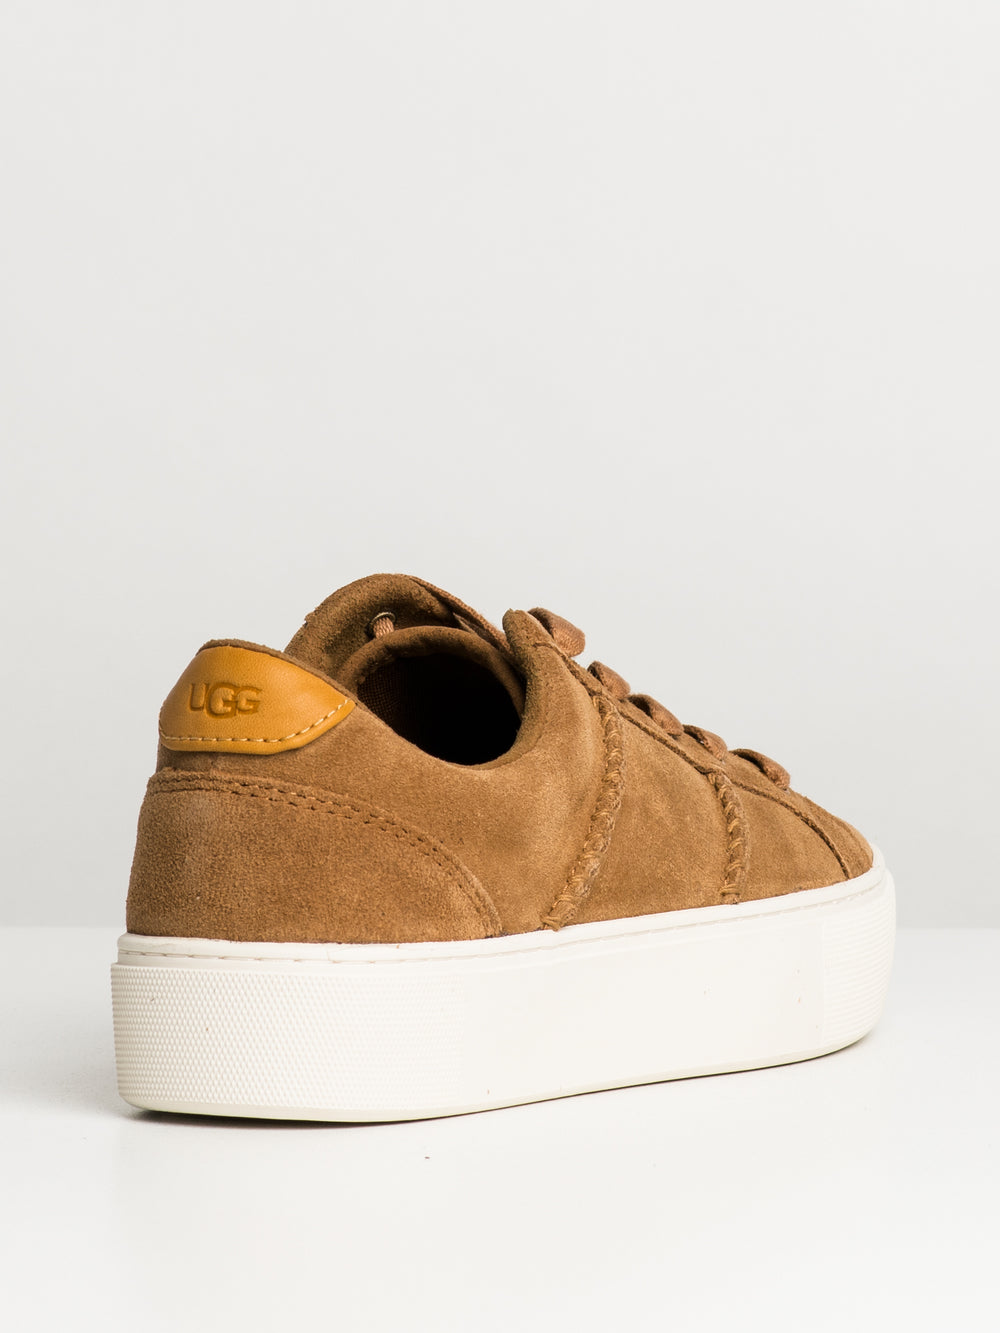 WOMENS UGG DINALE SUEDE SNEAKER - CLEARANCE